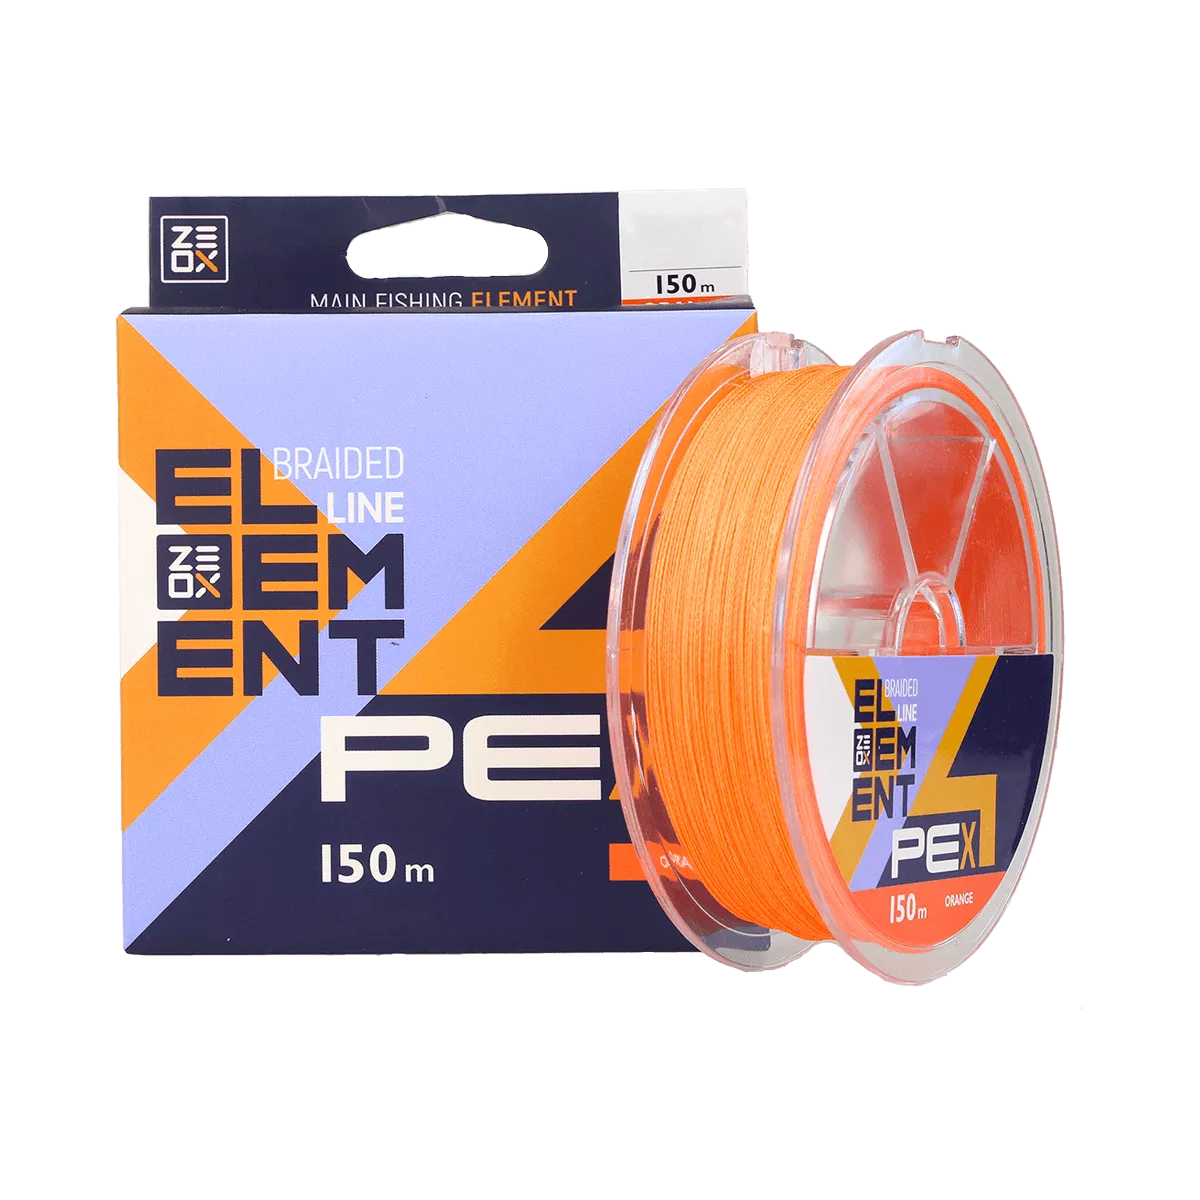 ZEOX Braided Line Element PE X4 150m Orange: check it out on the